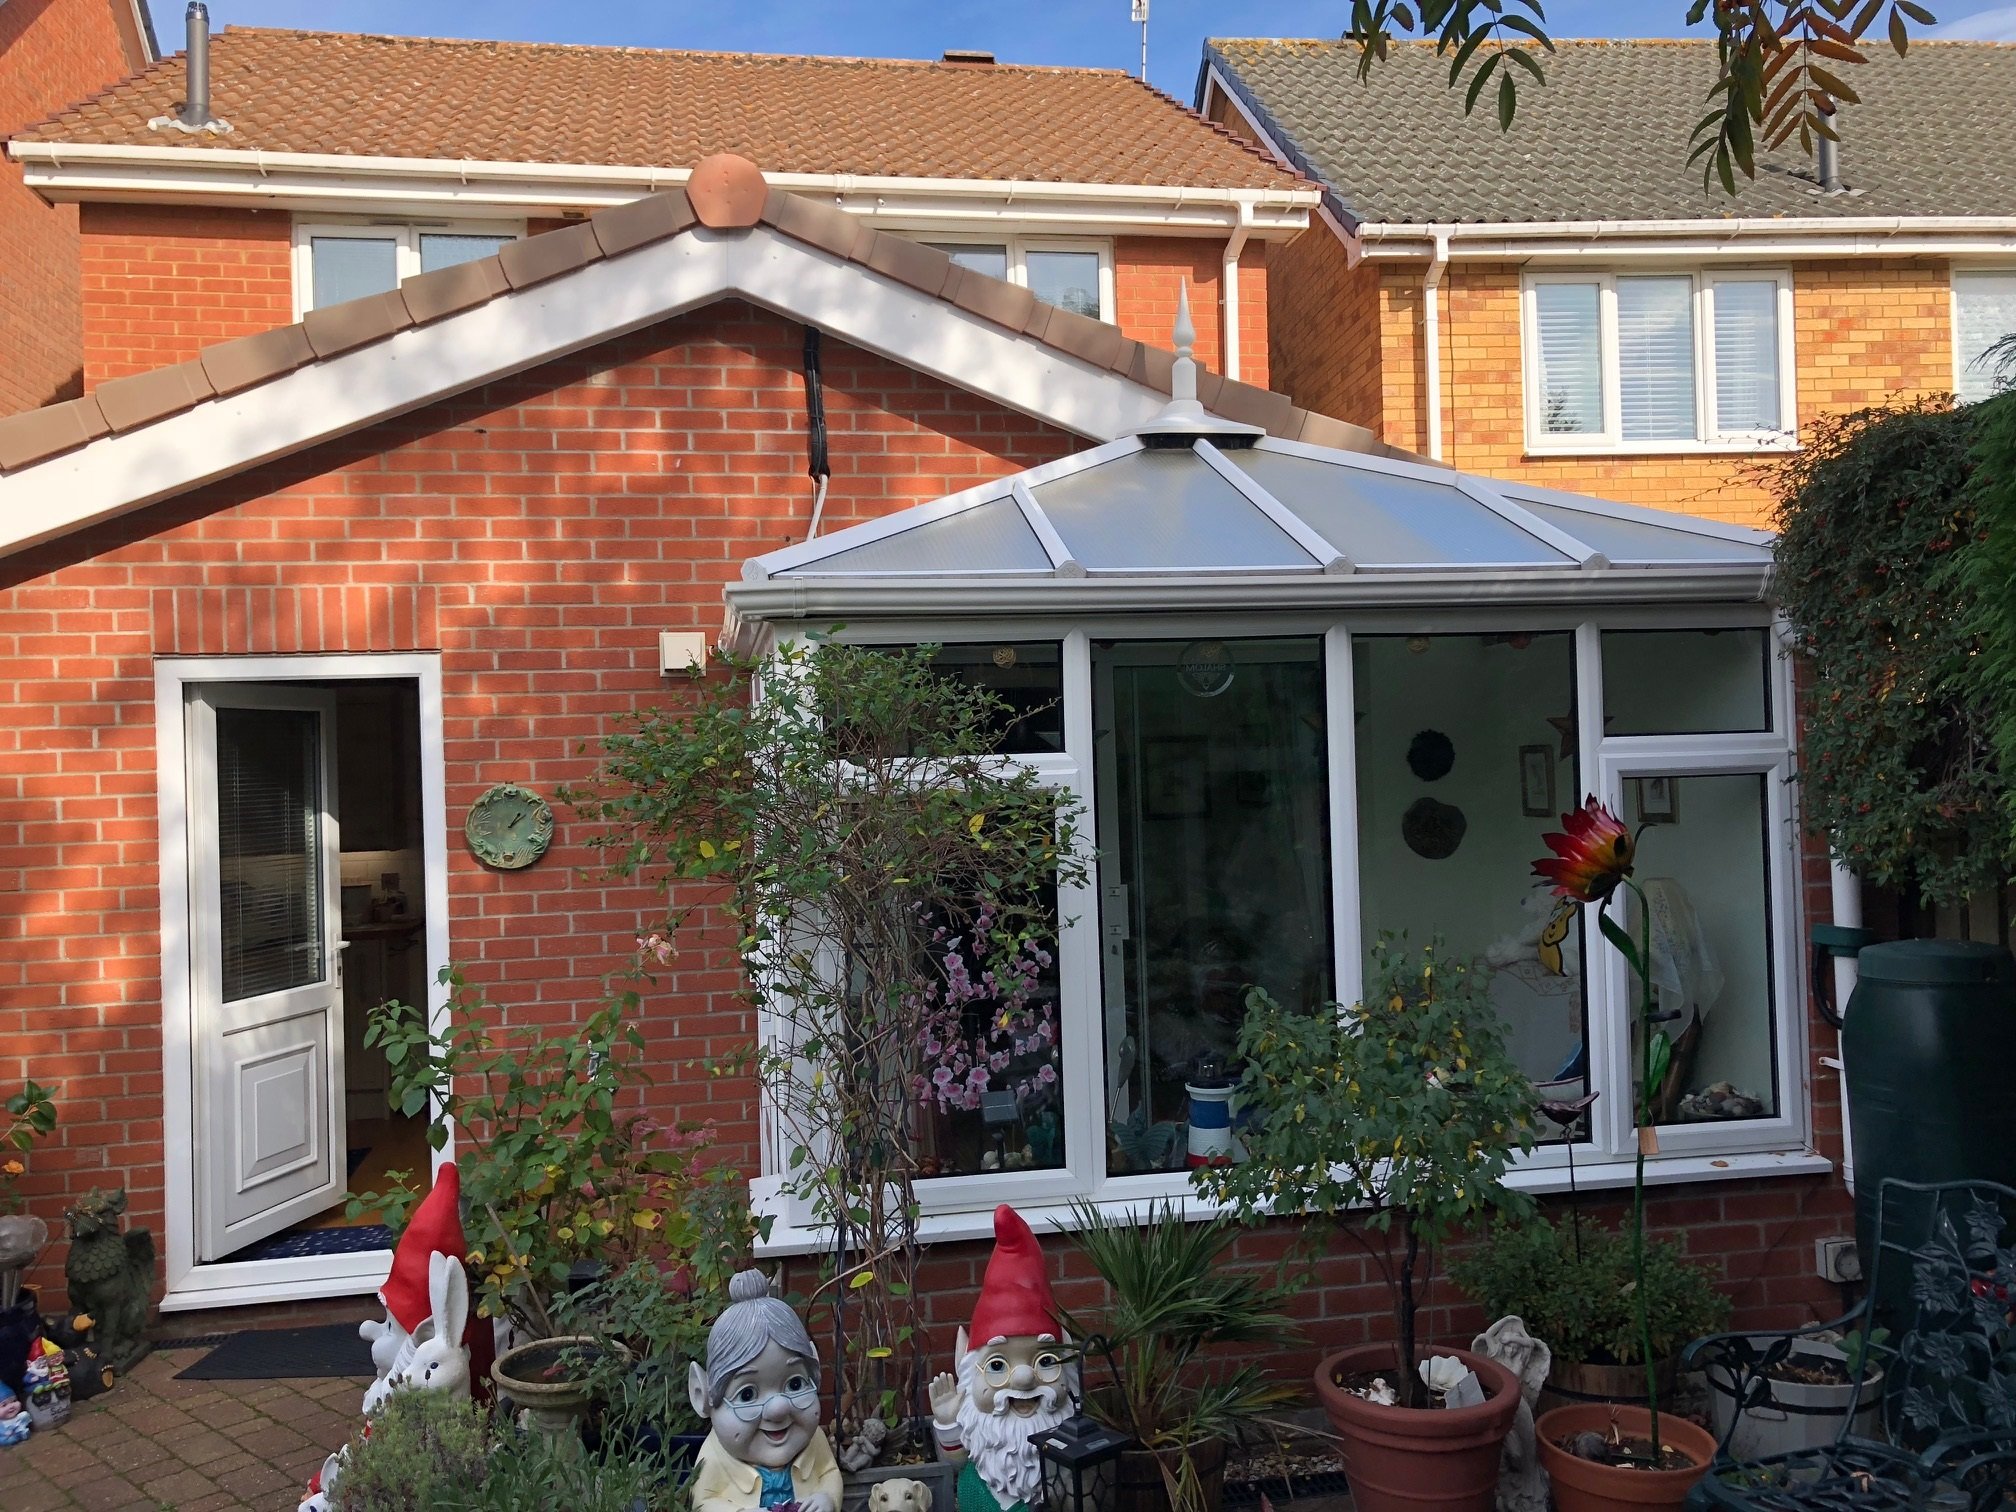 Conservatory in St Edmunds before a Conservatory Roof Conversion